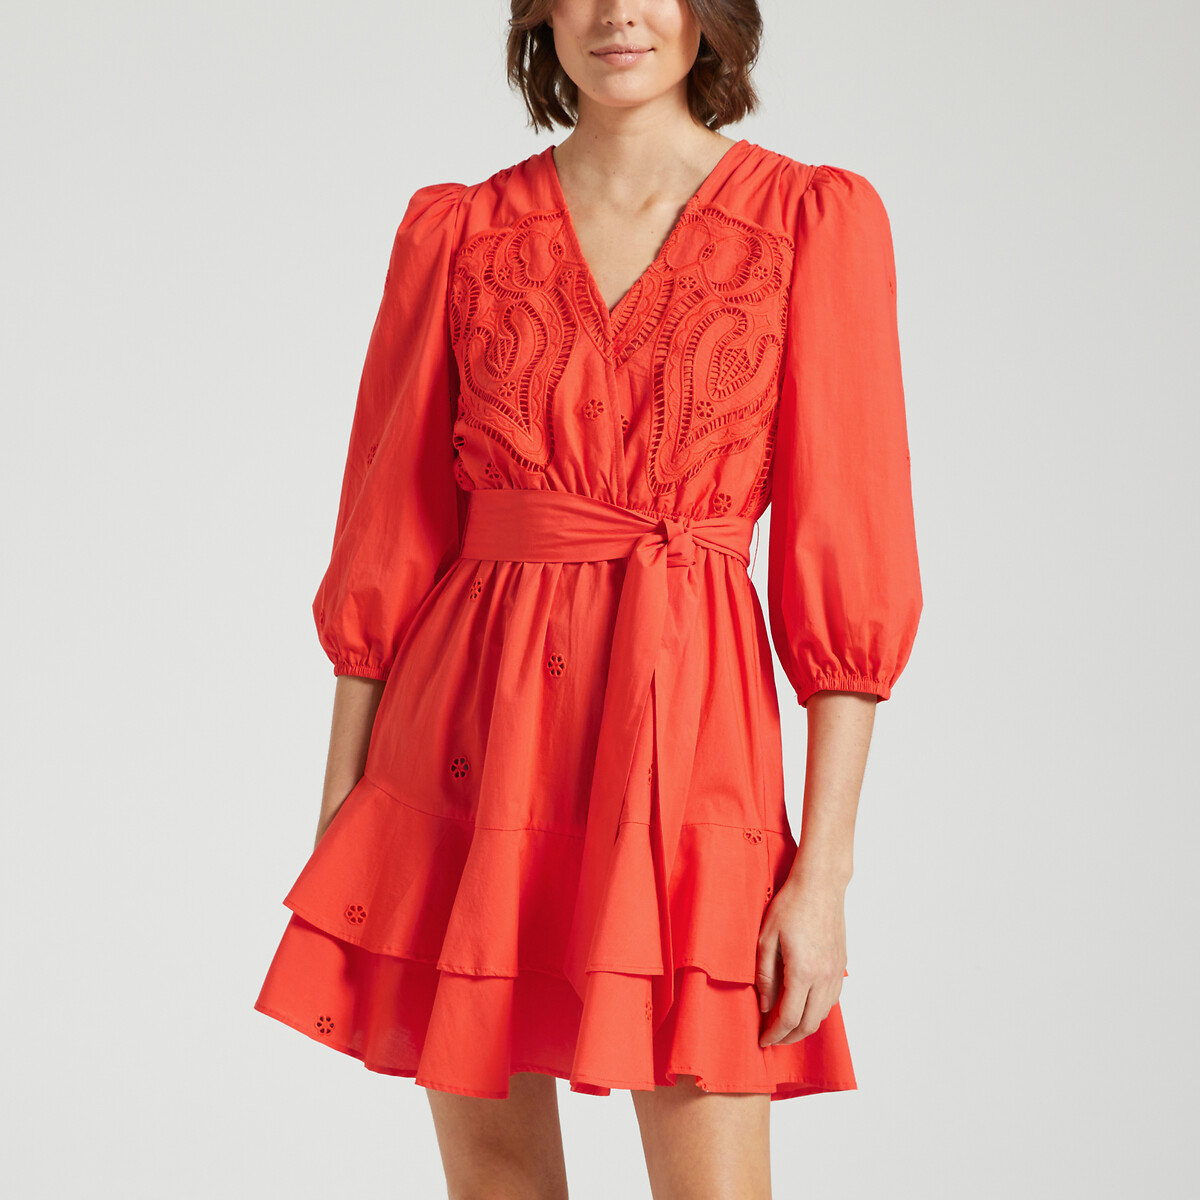 Image of Cliff Tiered Ruffled Dress in Cotton with 3/4 Length Sleeves